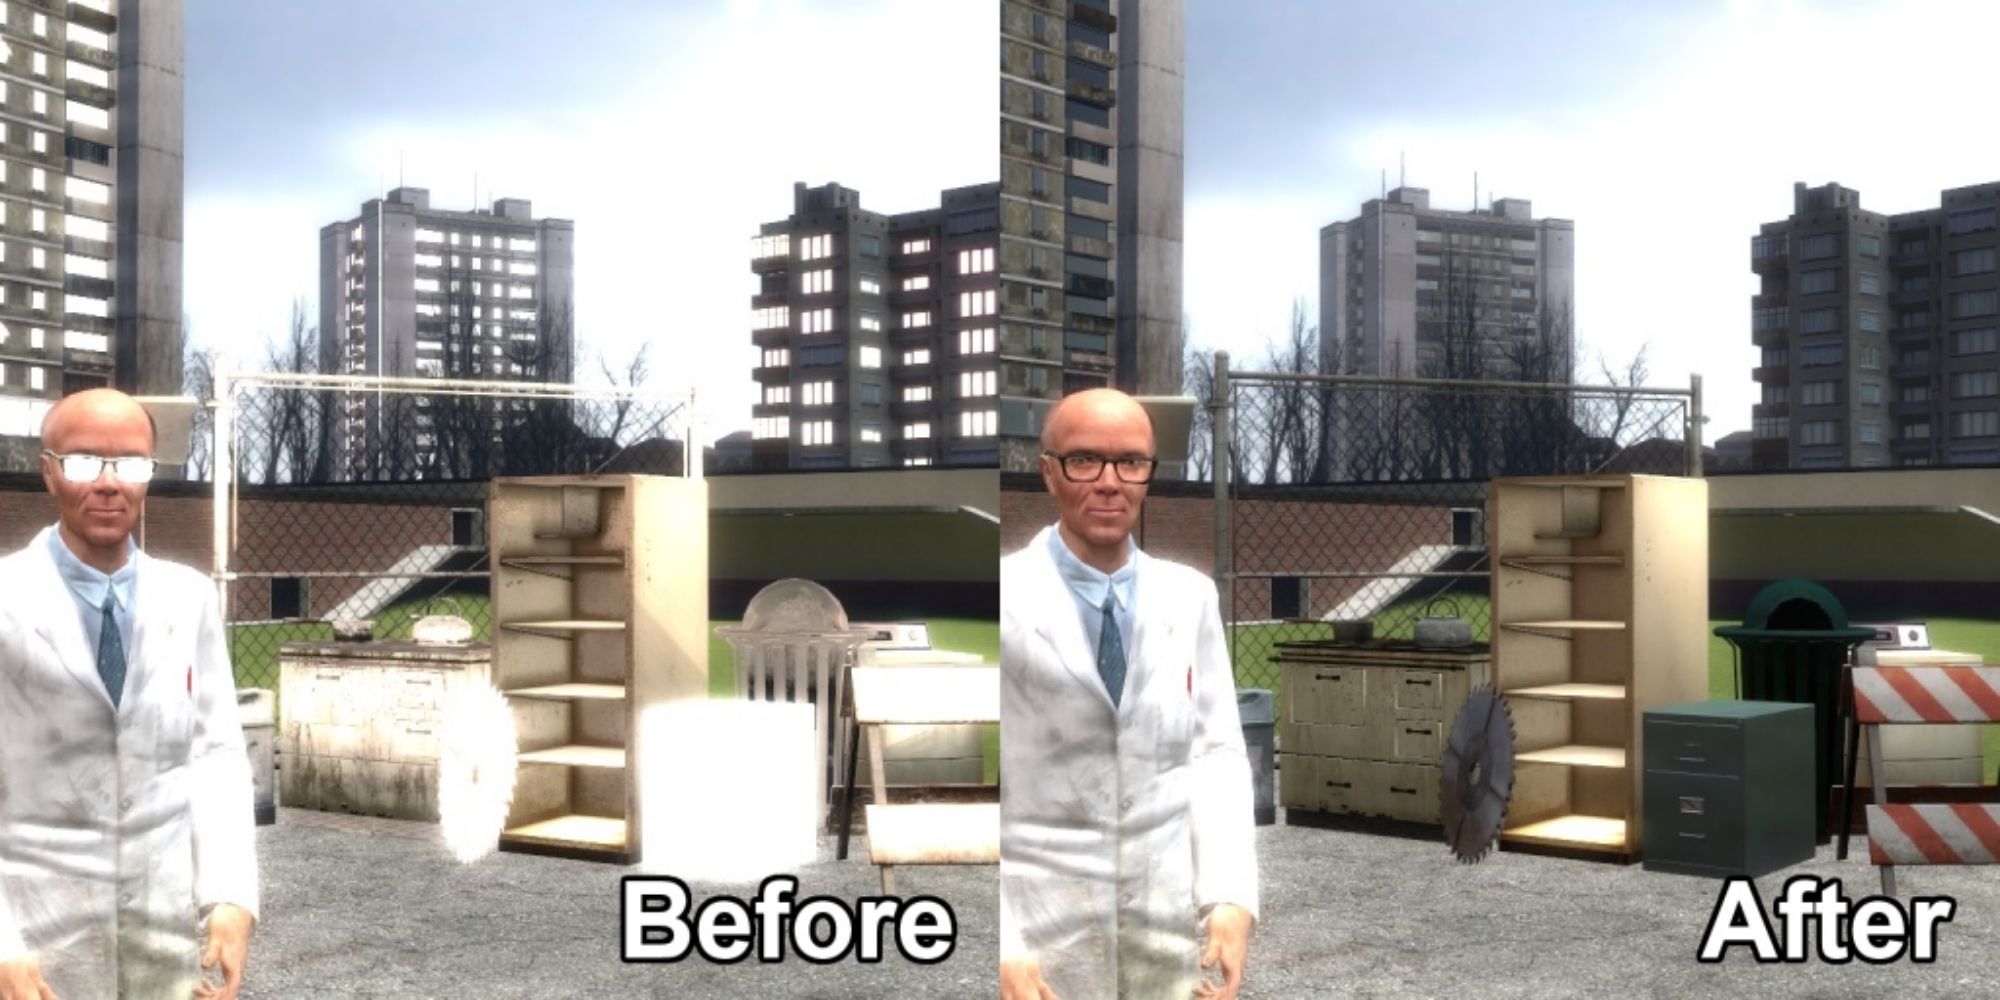 a before and after pic to show the glowing textures this mod fixes